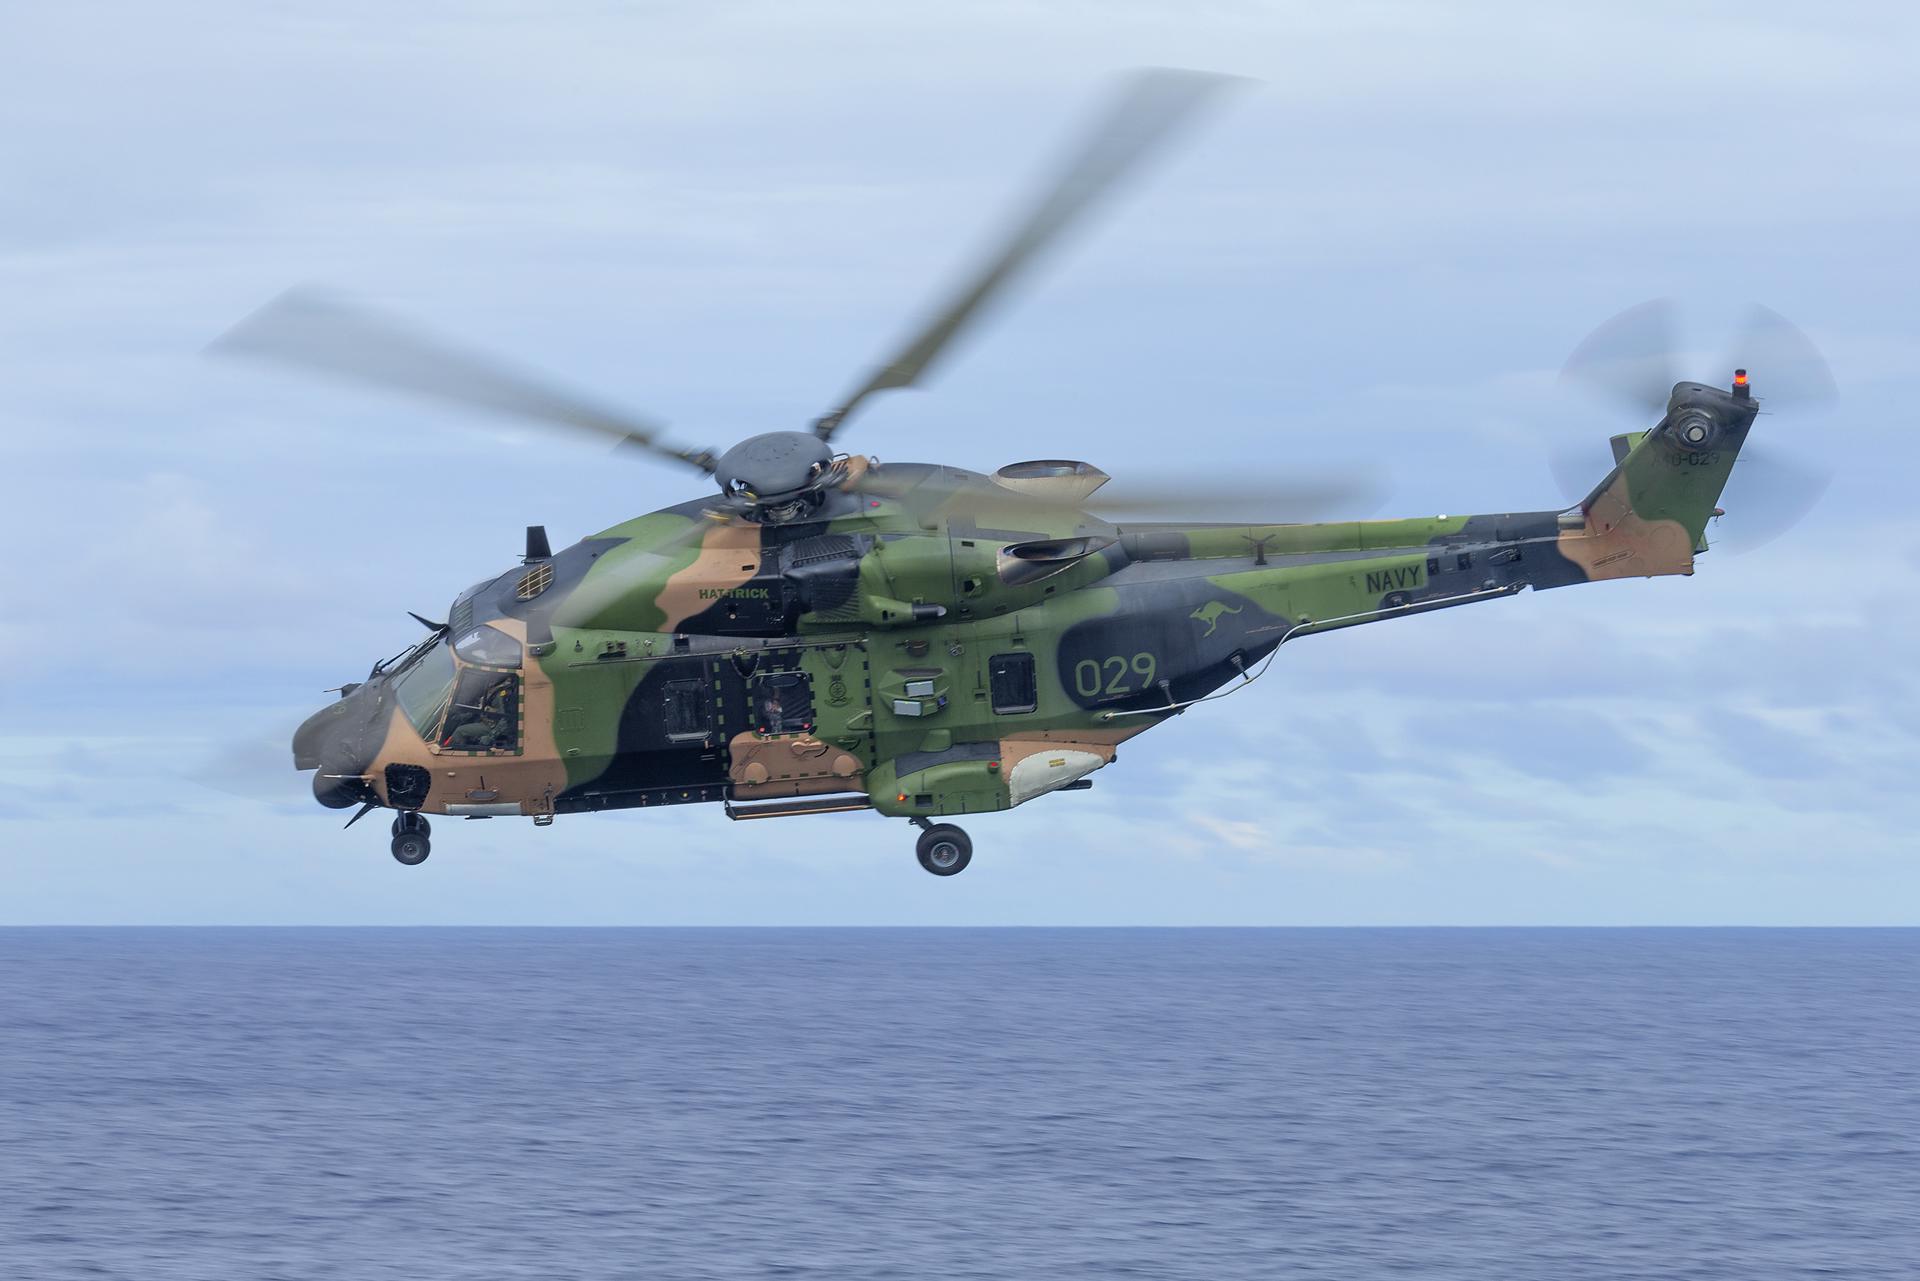 A handout file photo made available on 29 July 2023 by the Australian Defence Force (ADF) shows an Australian Army MRH-90 Taipan helicopter conducting flying serials during a ship's transit to Vanuatu, 23 July 2020 (issued 29 July 2023).  EFE/EPA/ADF/LSIS James McDougall HANDOUT MANDATORY CREDIT: COMMONWEALTH OF AUSTRALIA 2023, DEPARTMENT OF DEFENCE /